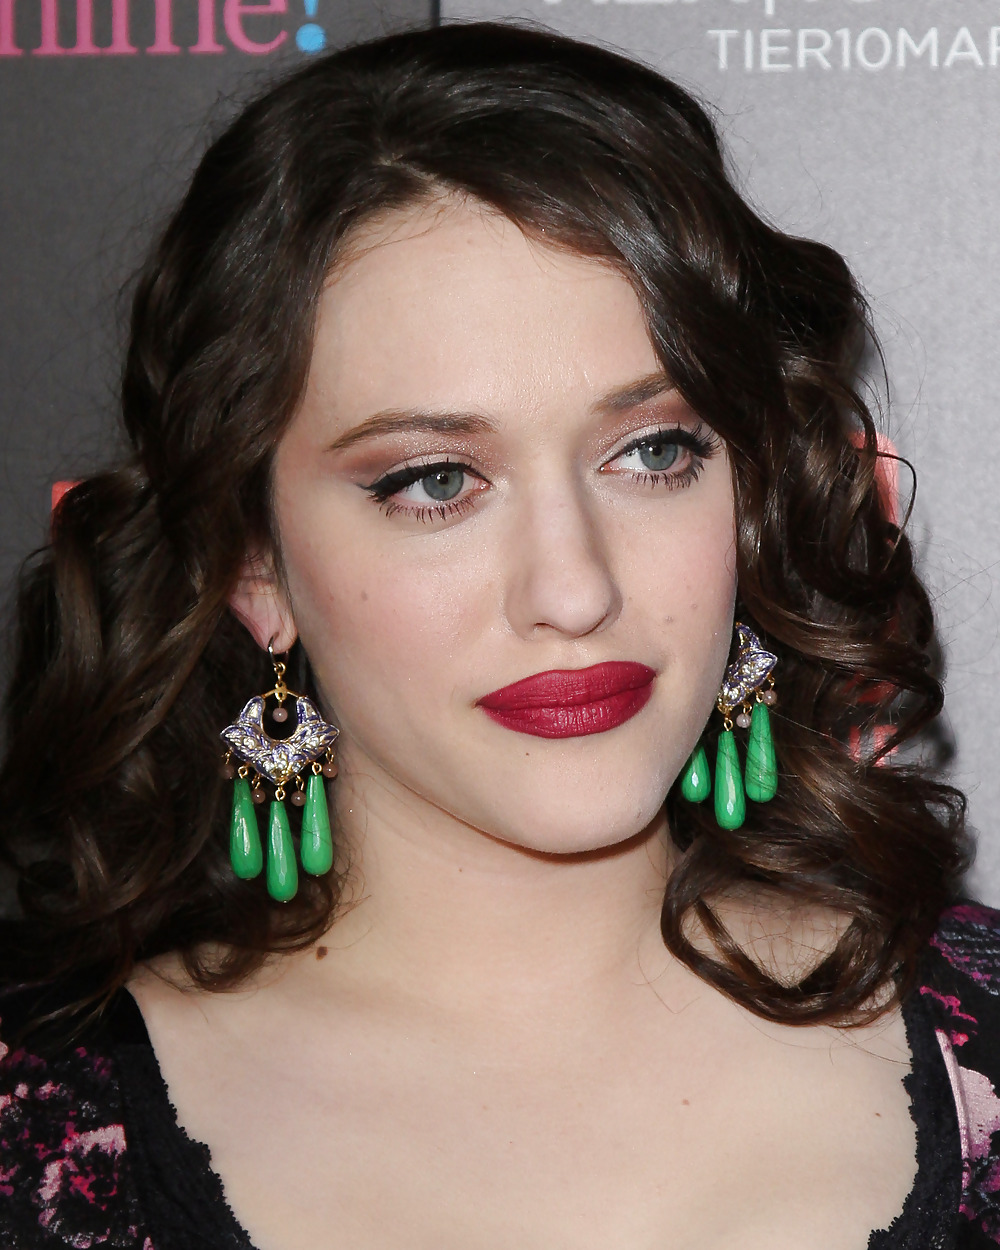 Kat dennings - tv guide magazines hot list party in la
 #6758072